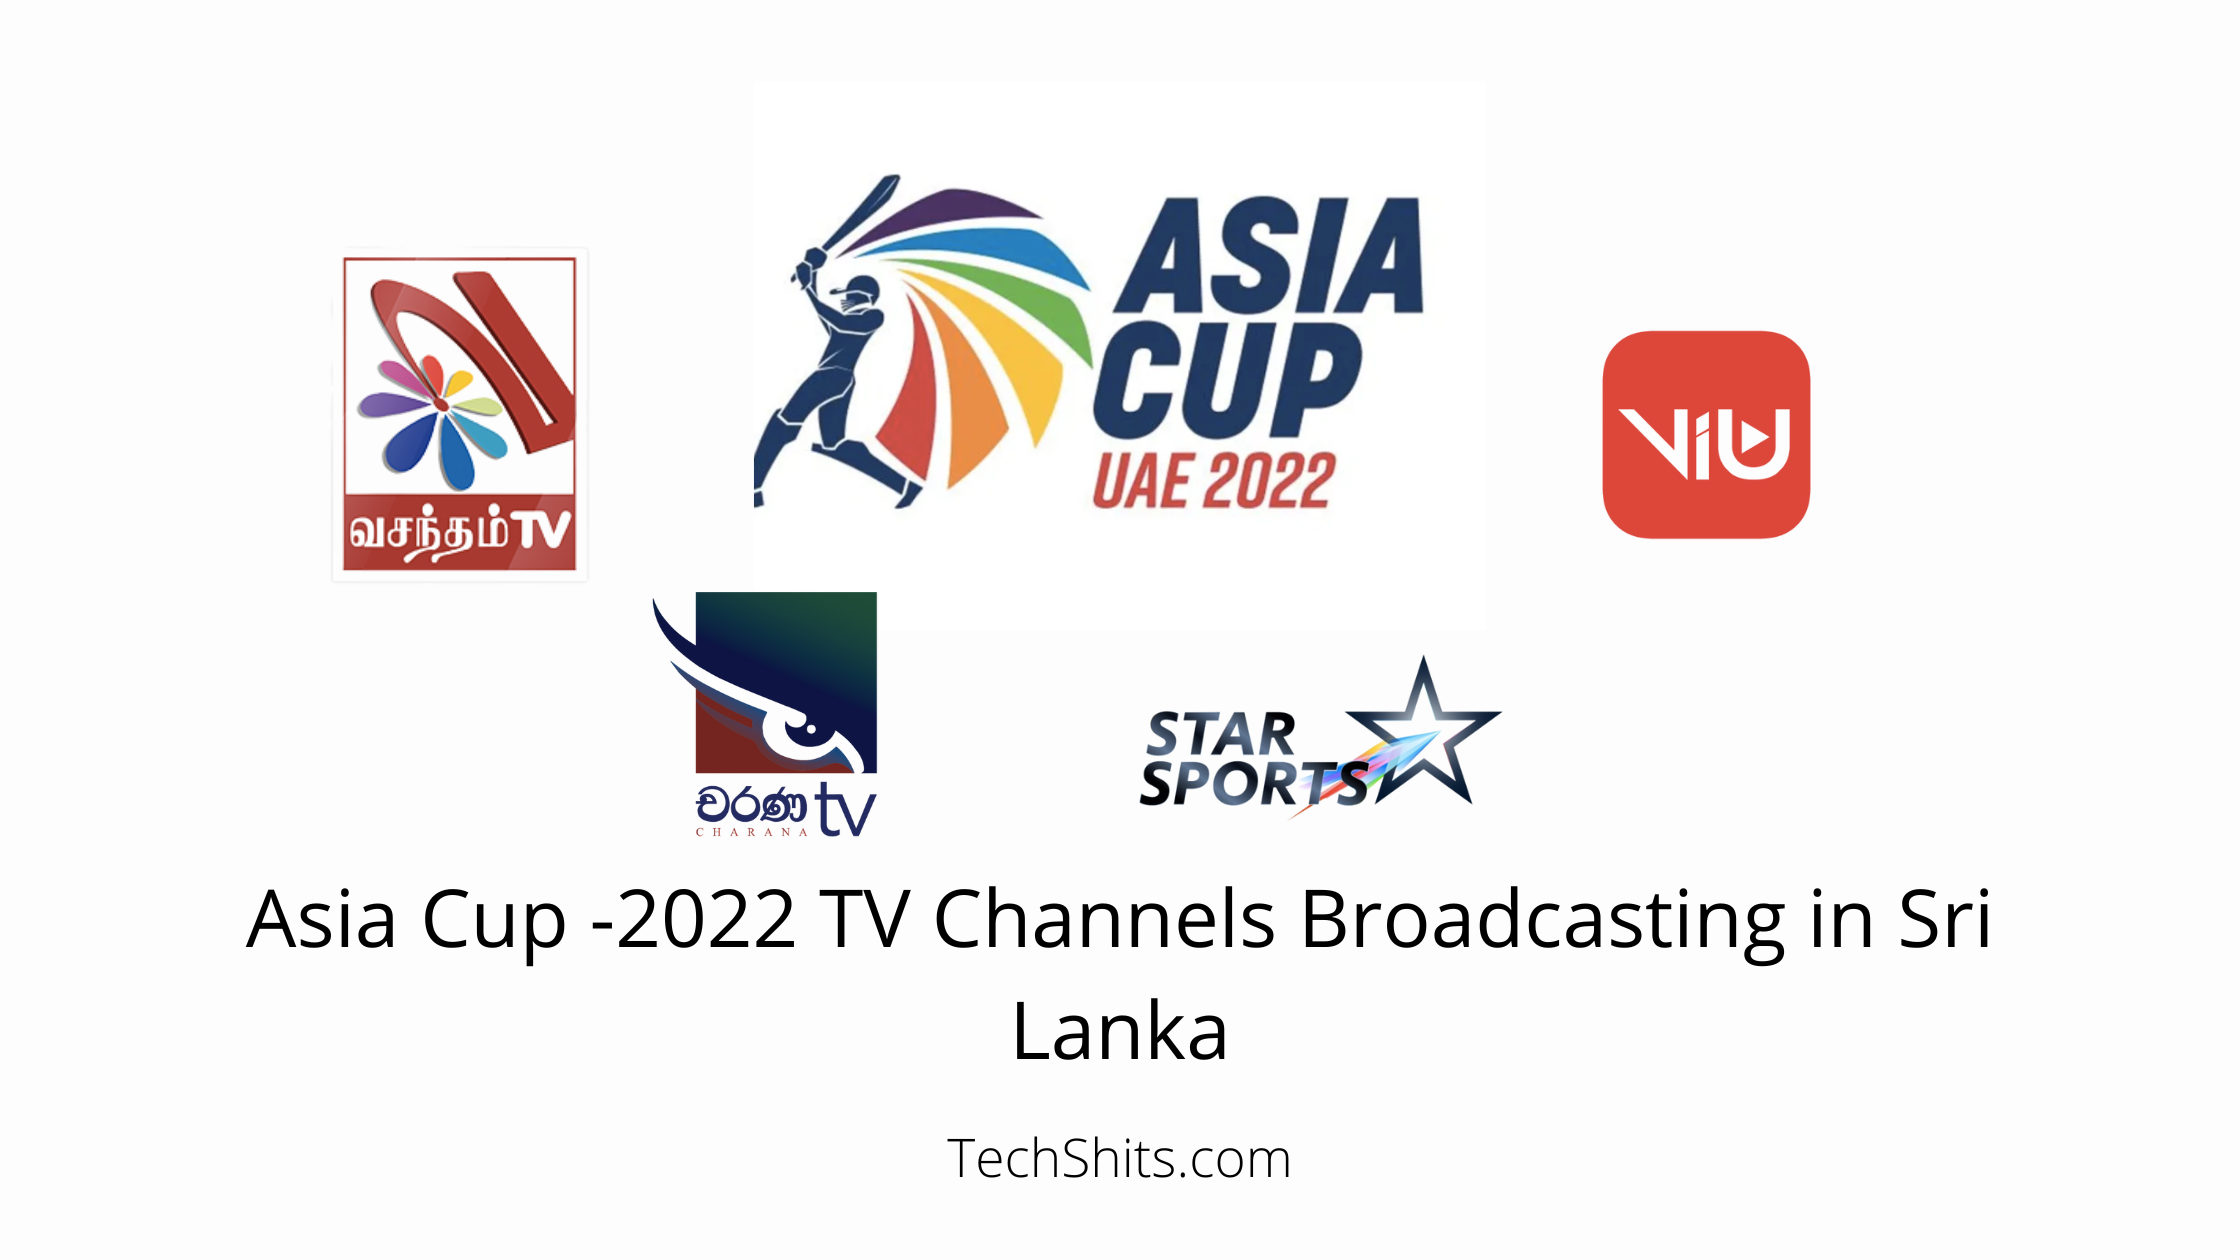 Asia Cup -2022 TV Channels Broadcasting in Sri Lanka